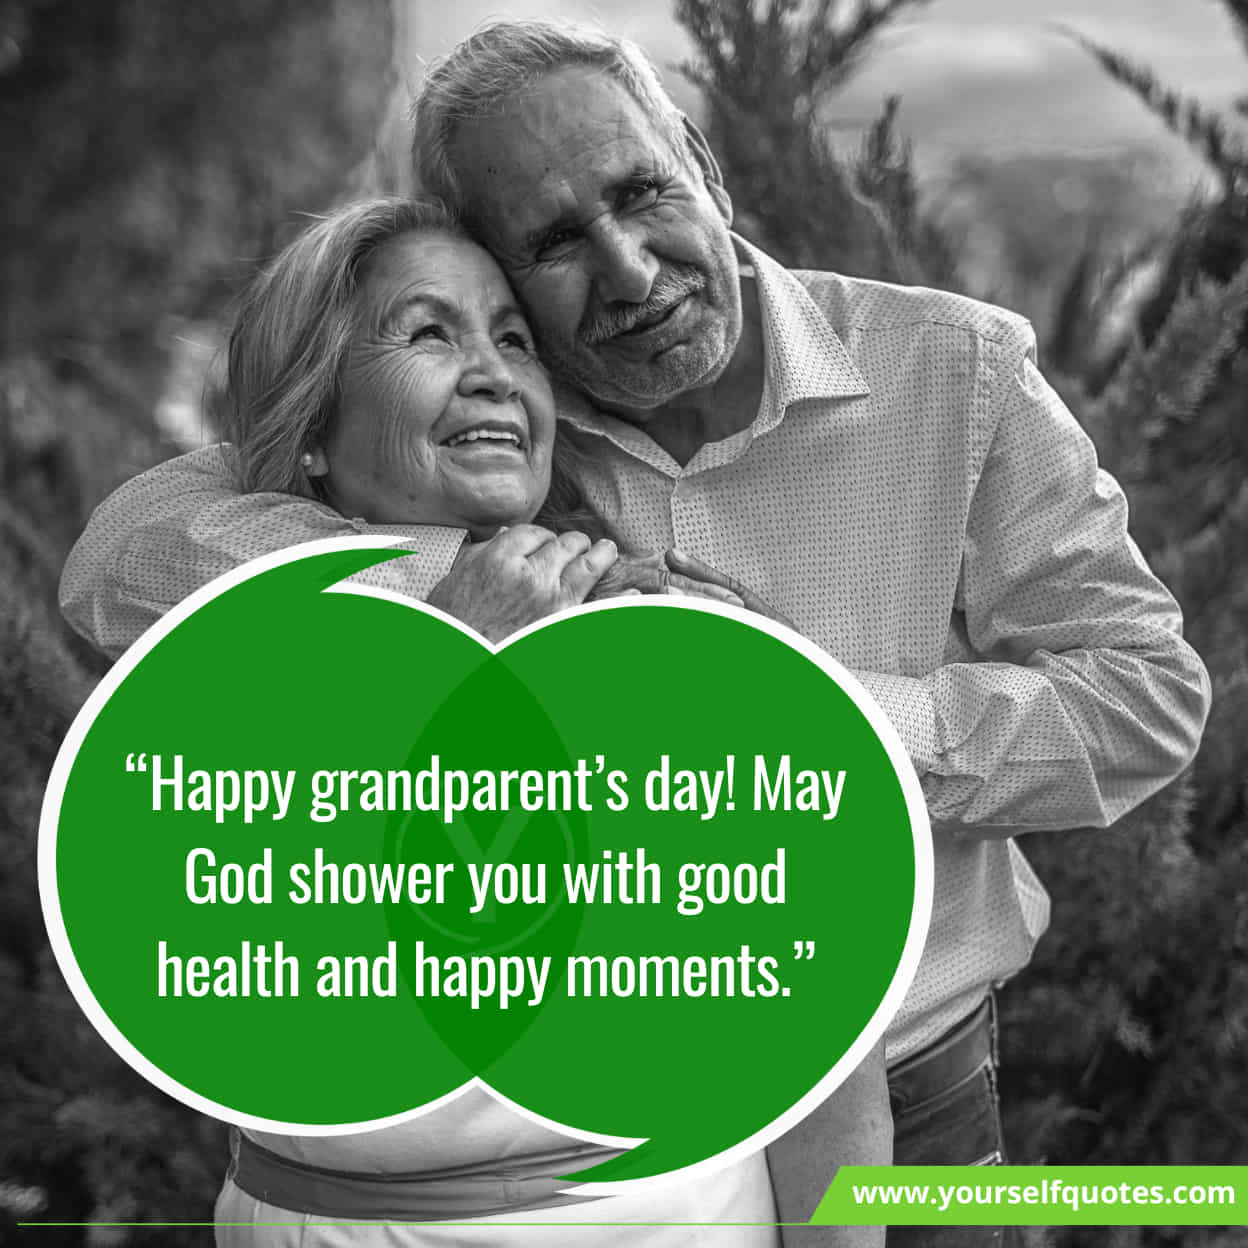 Heart-Warming Happy Grandparents Day Wishes Messages (2)